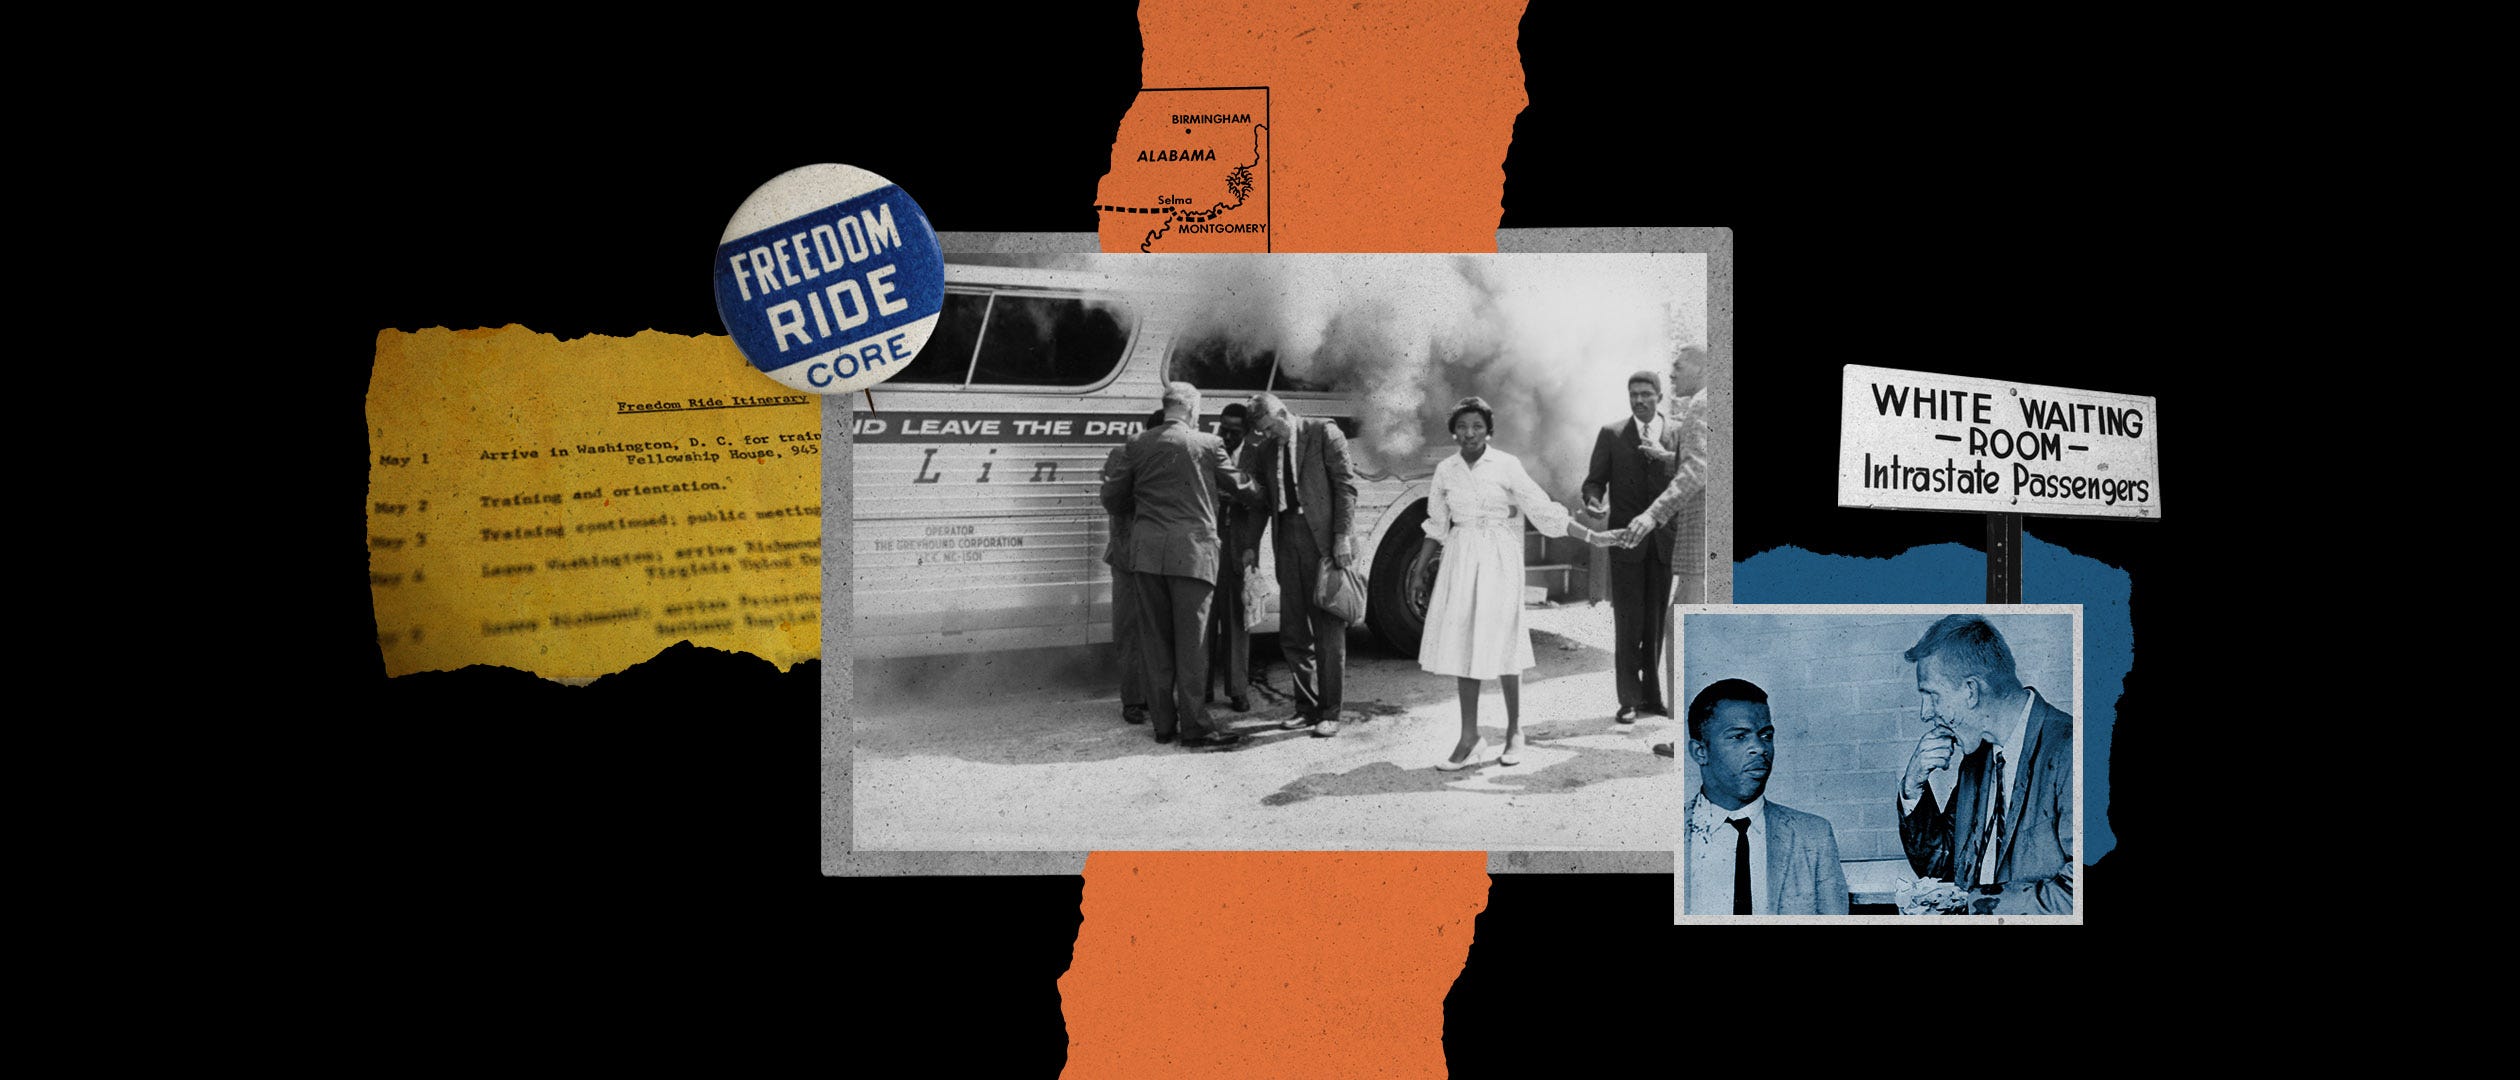 Civil rights in America: How 1961 changed the course of US history